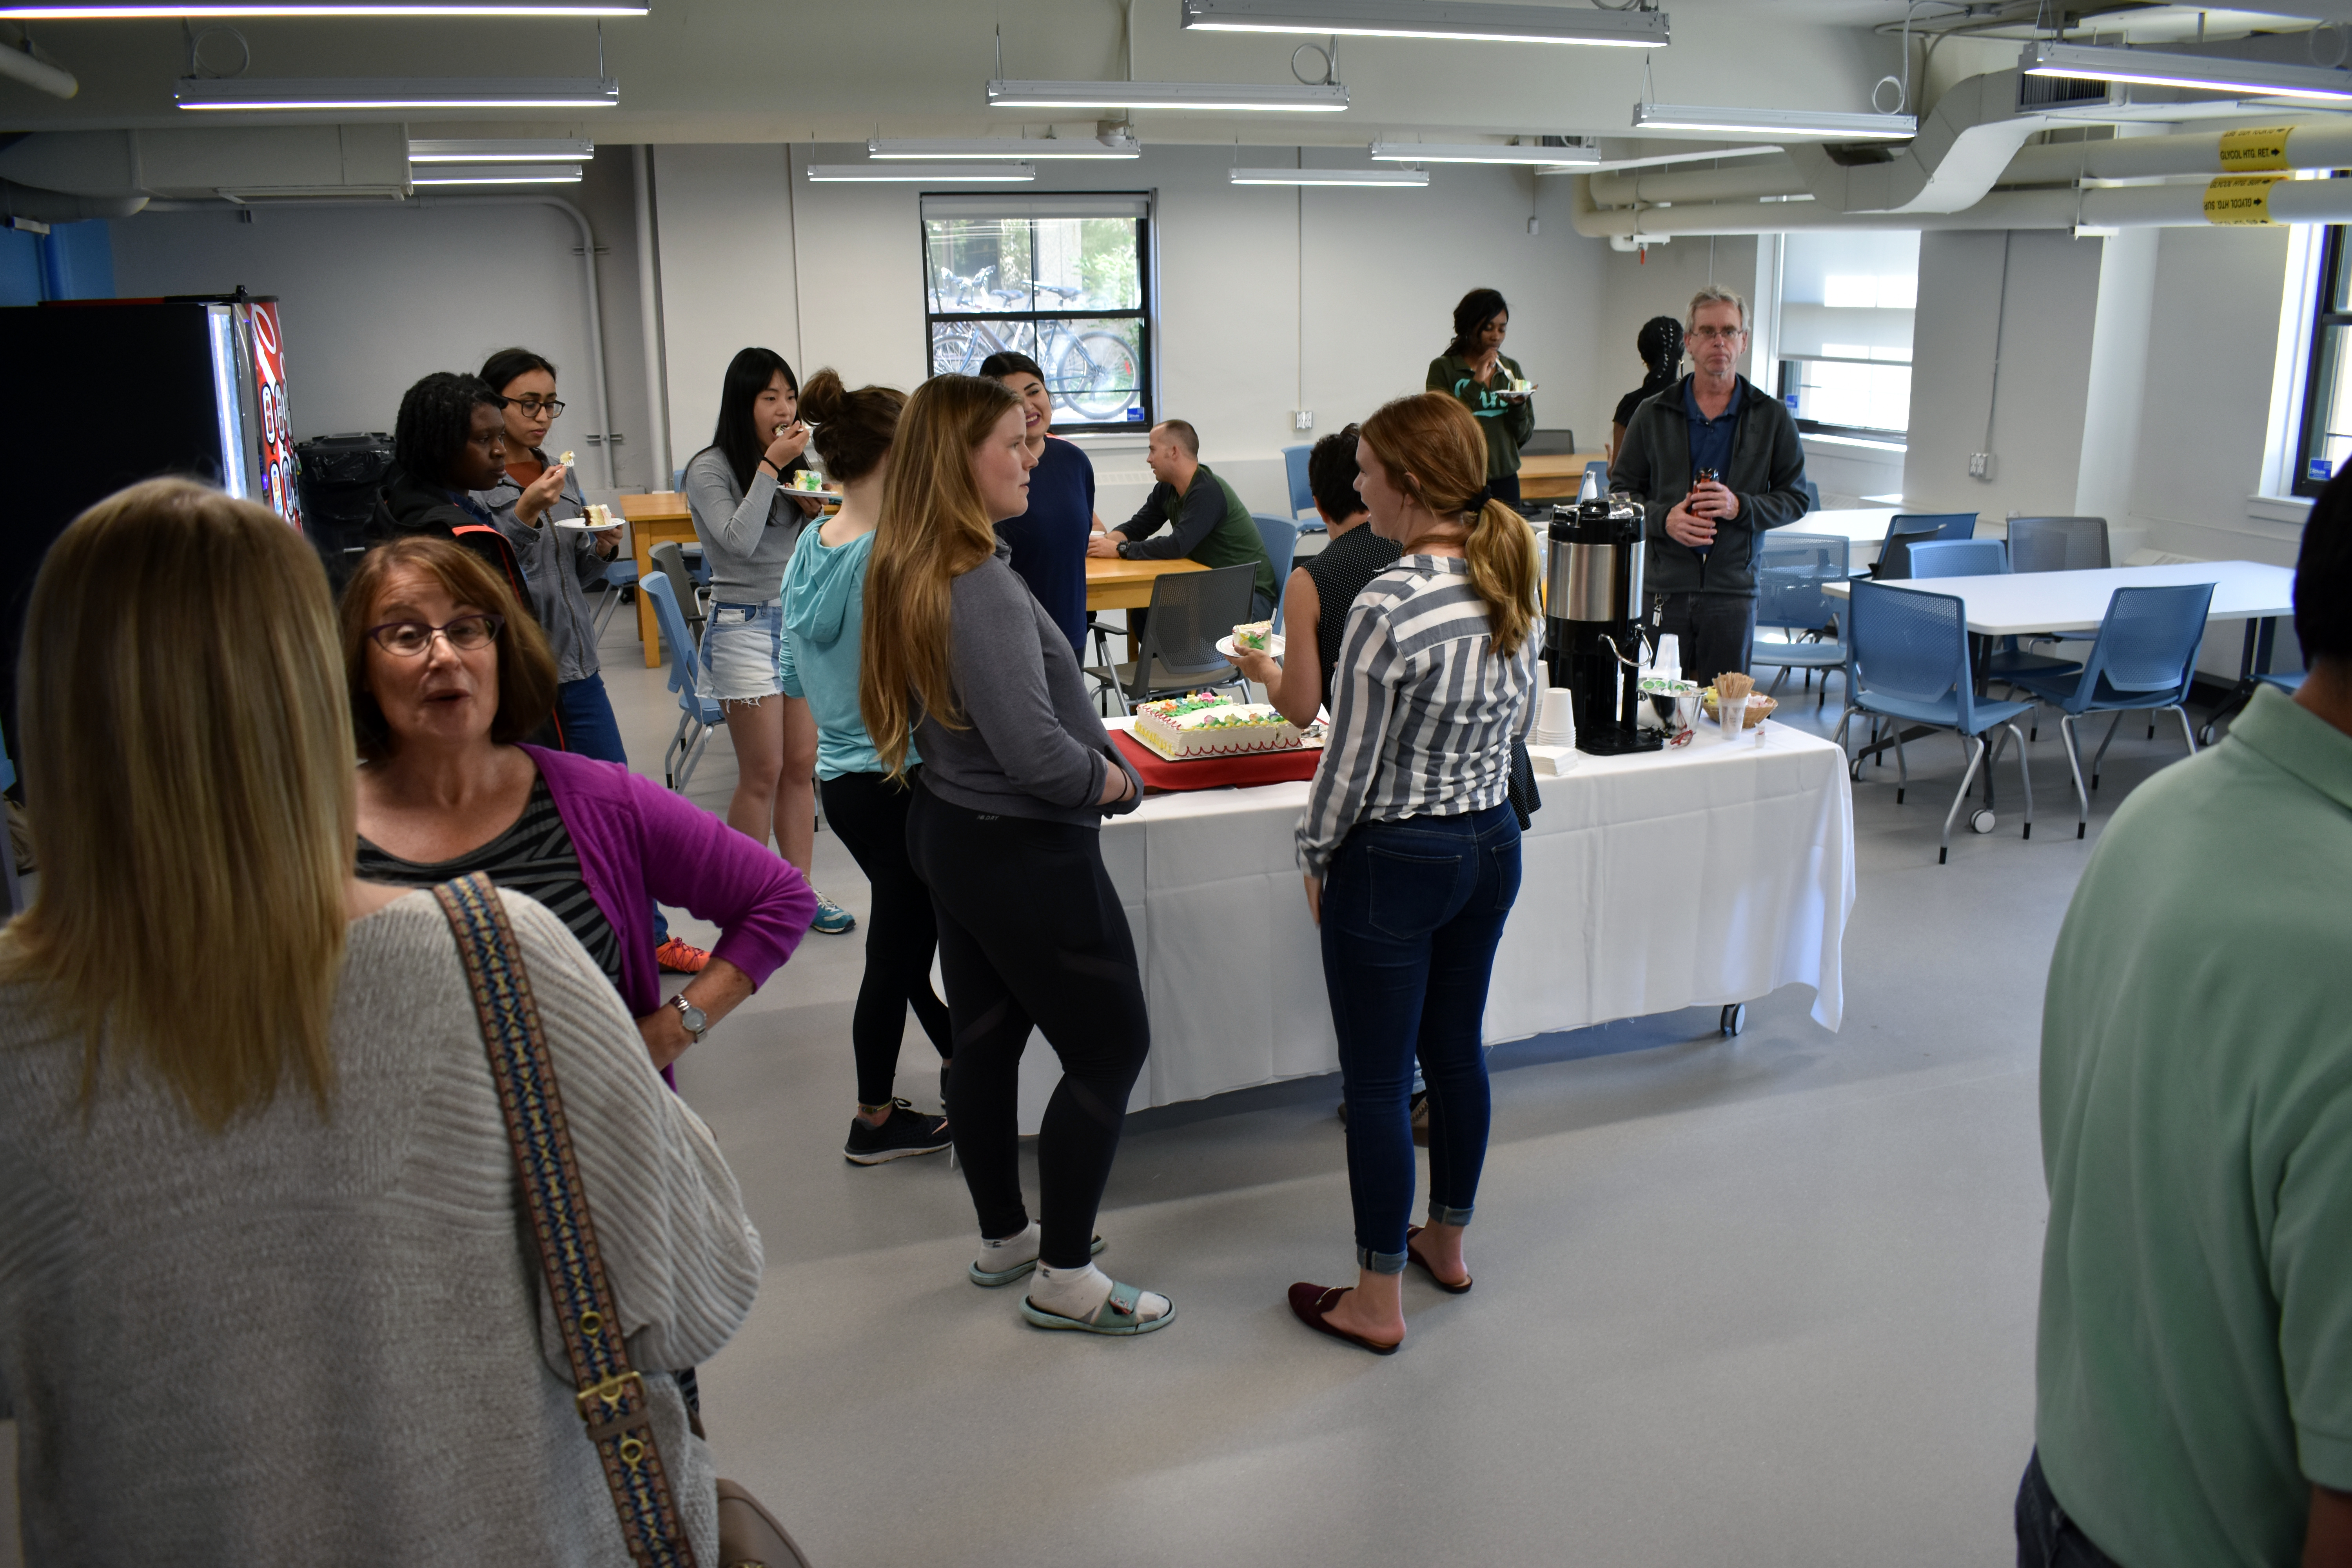 Students and staff enjoy the new space